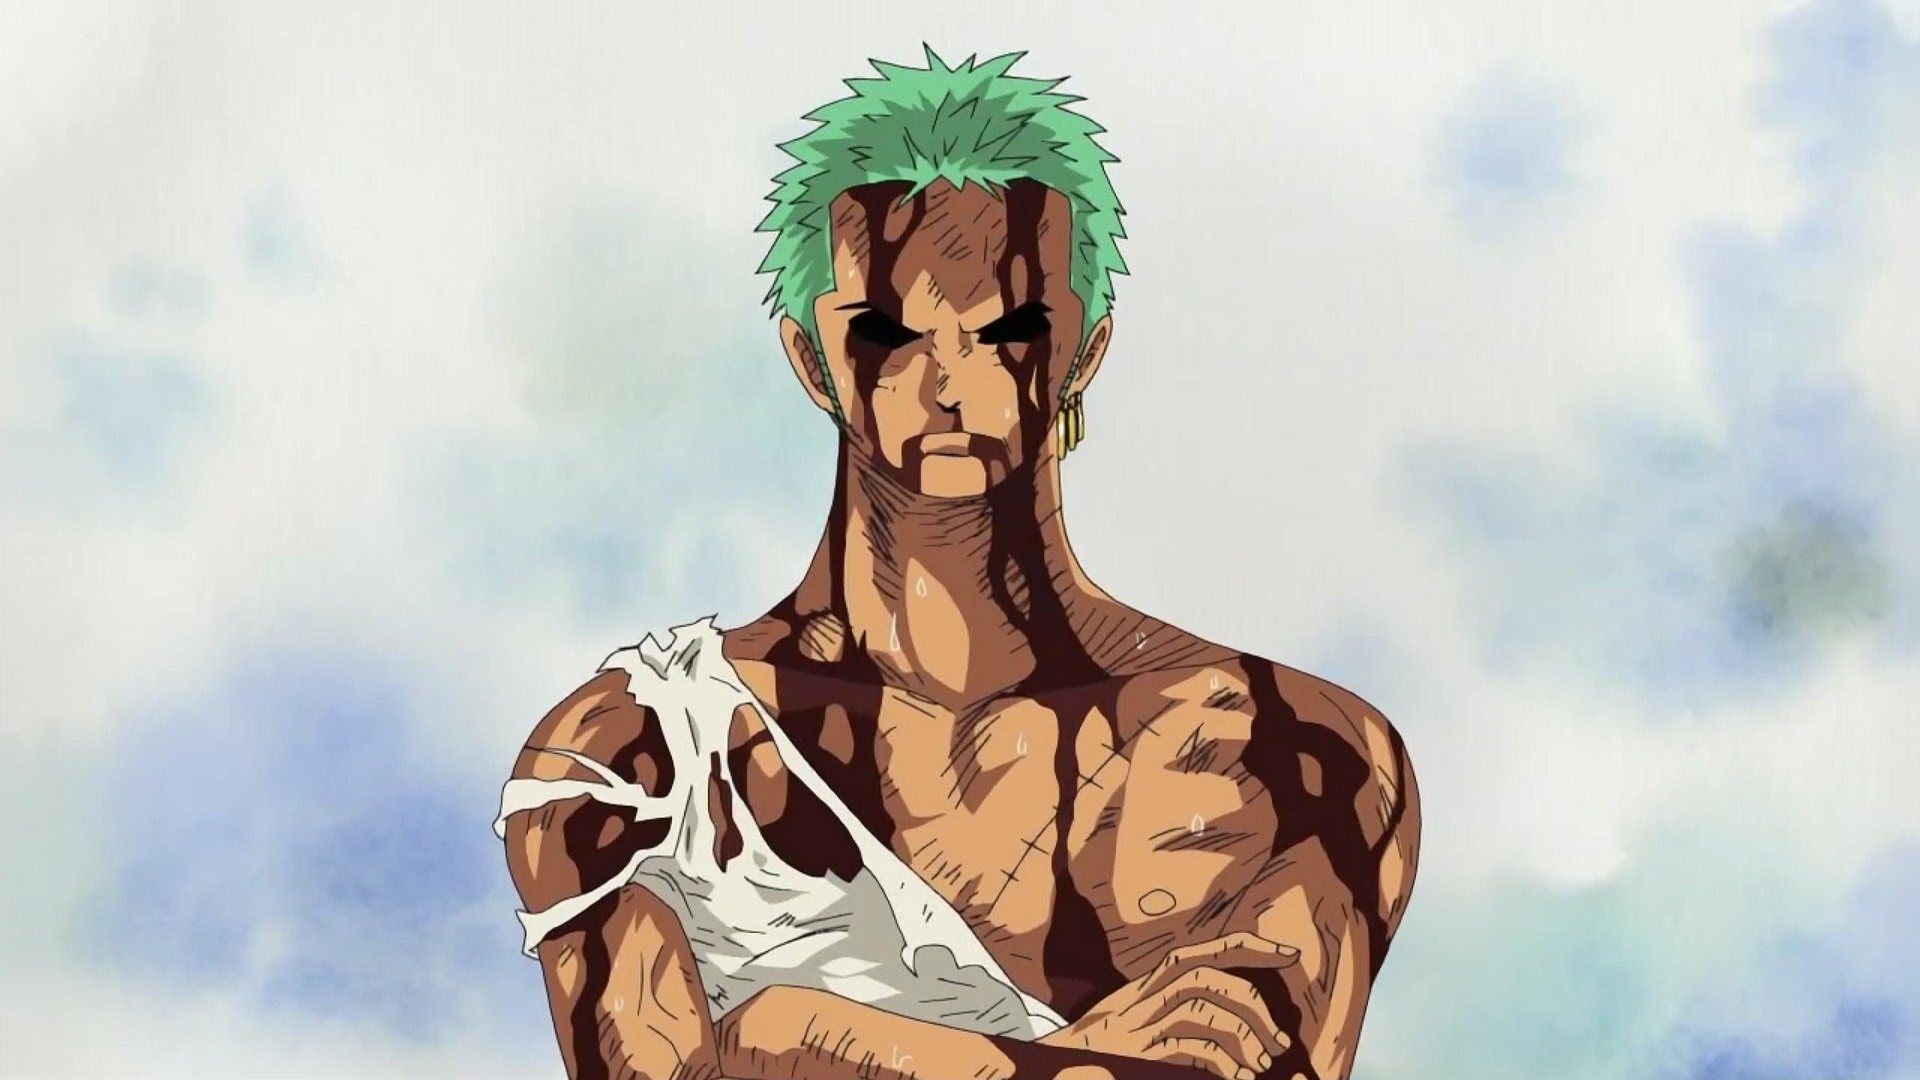 Is Zoro the best character in One Piece?